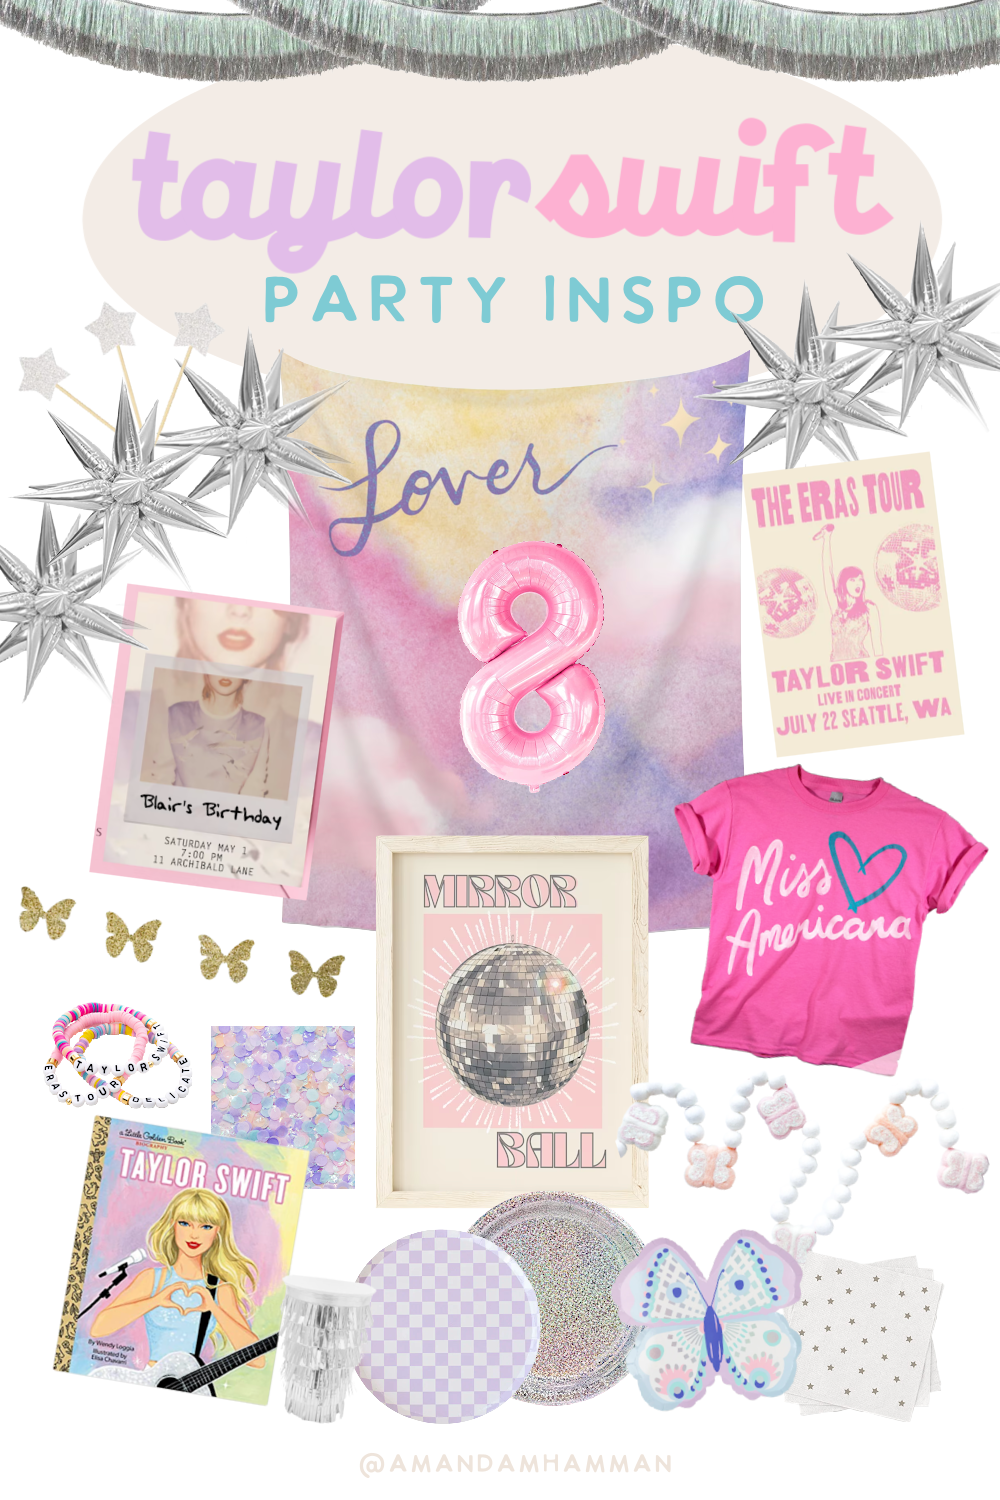 Taylor Swift Gift-bags  Taylor swift birthday party ideas, Taylor swift  birthday, Taylor swift party